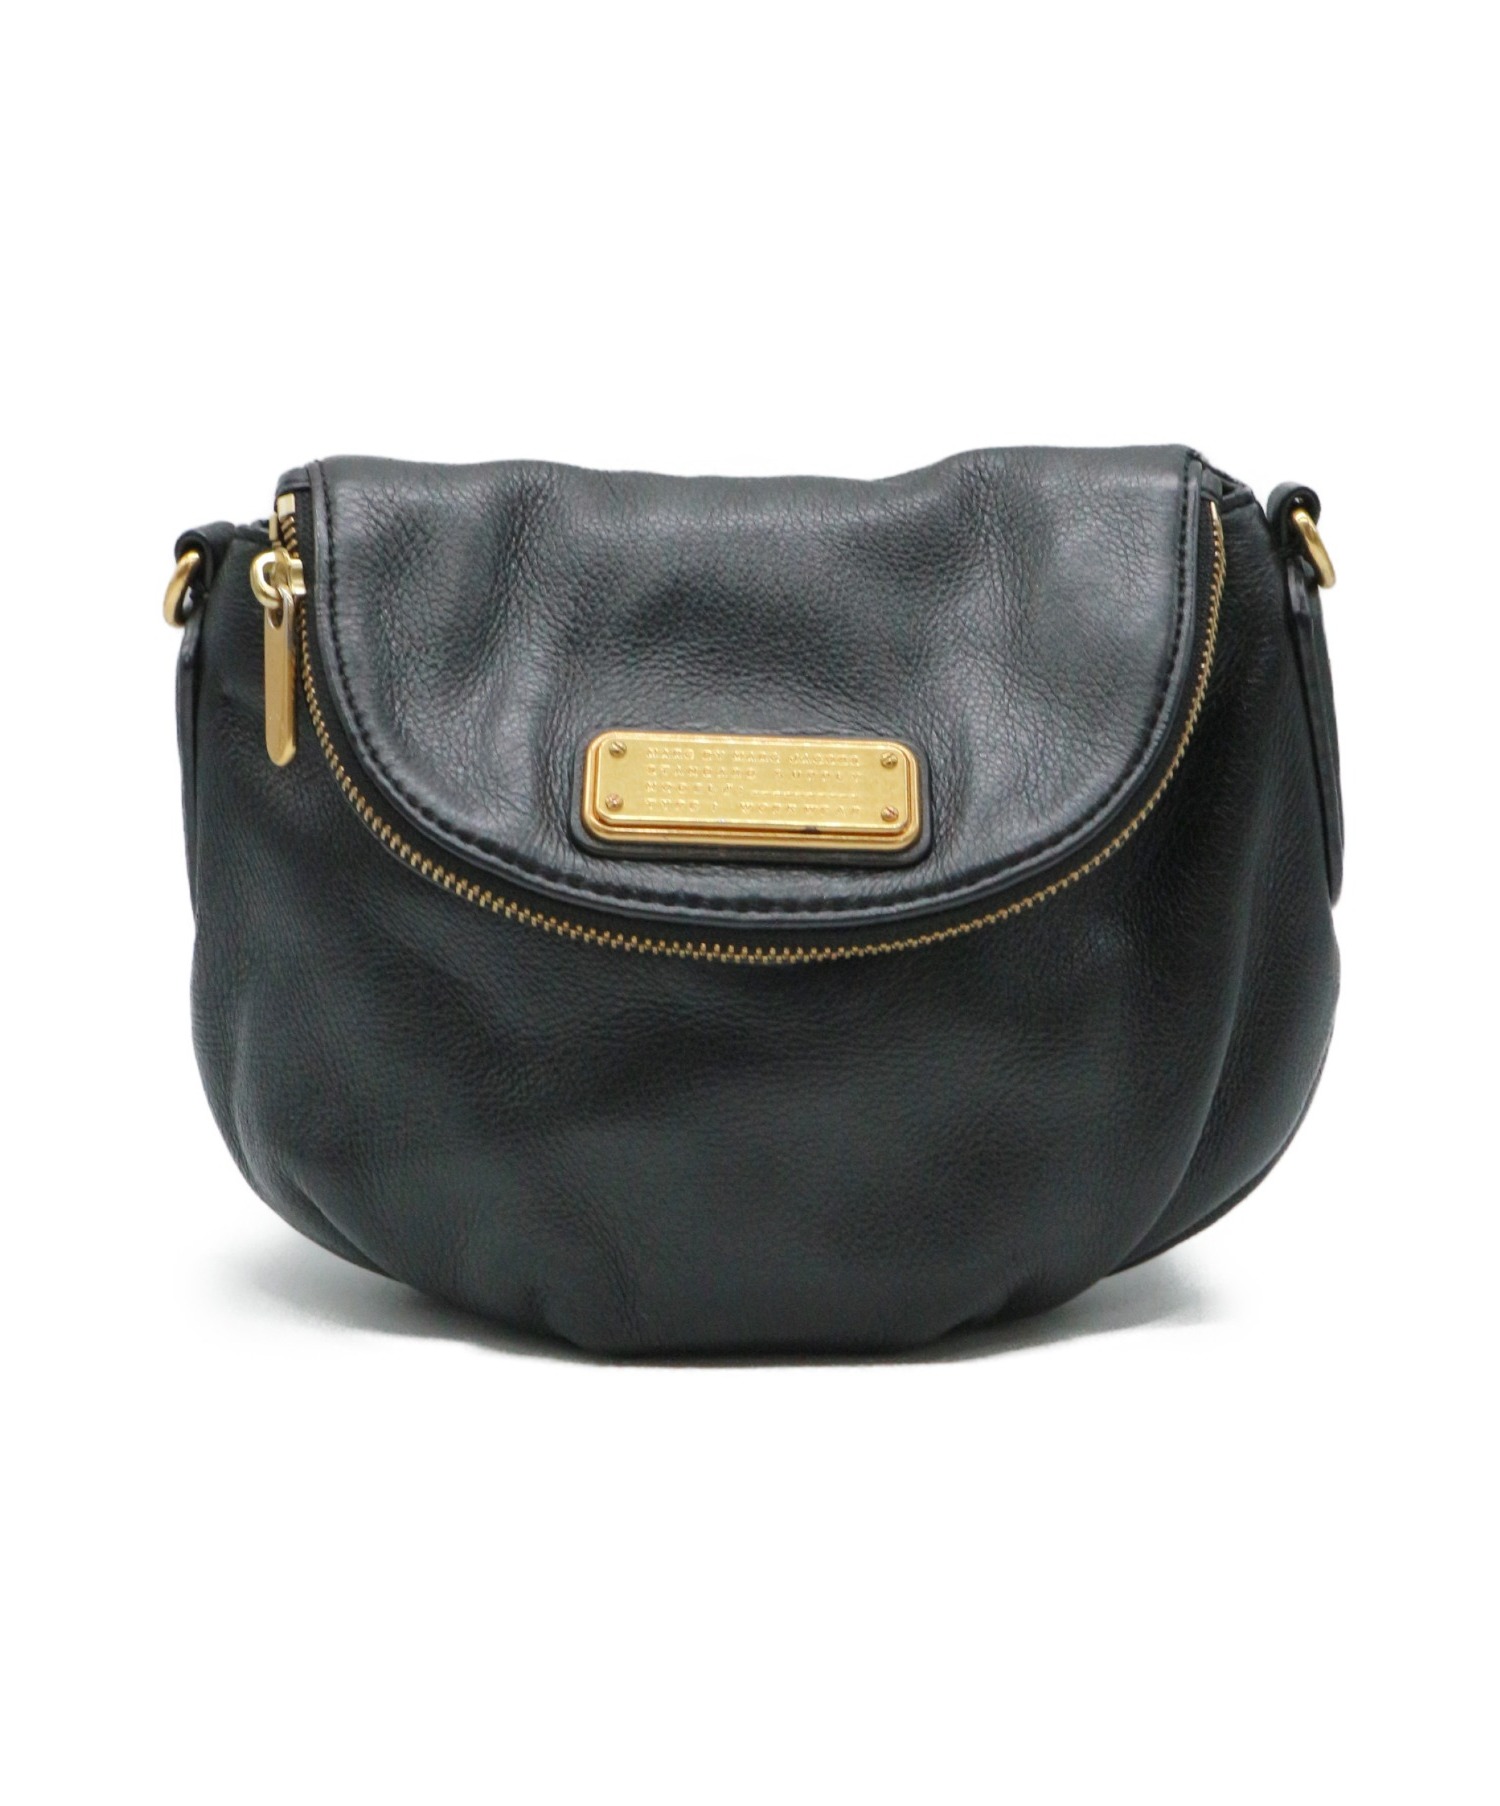 MARC BY MARC JACOBS レザー ショルダーバッグ ☆新品未使用